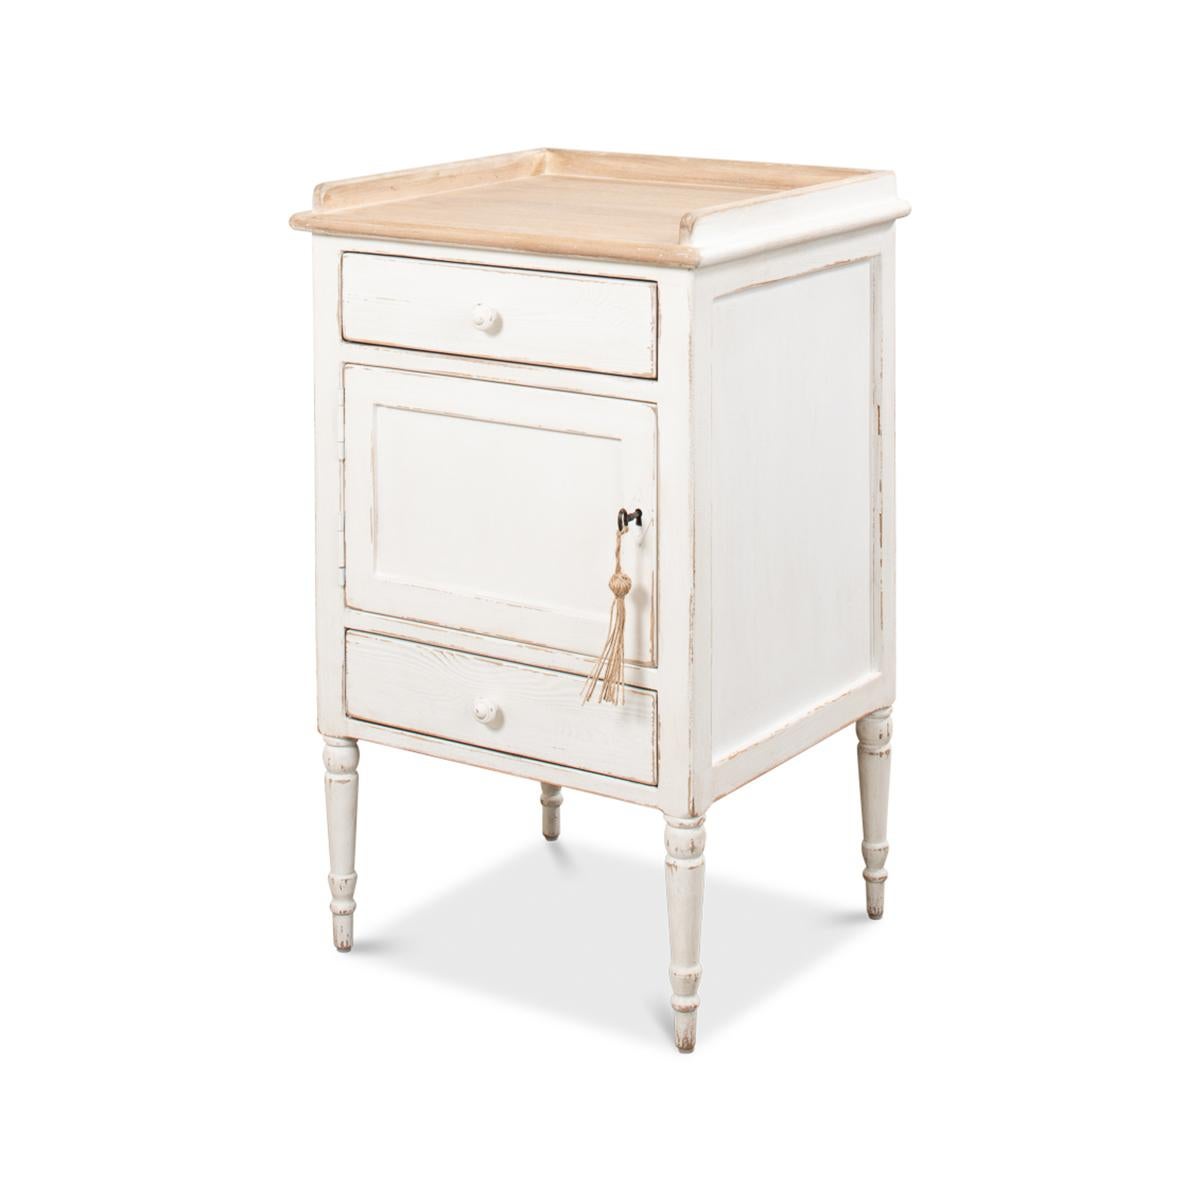 With a natural pine three quarter gallery top, two drawers and cupboard, in an antiqued white painted and distressed finish raised on turned and tapered legs.

Also sold individually.

Dimensions: 20